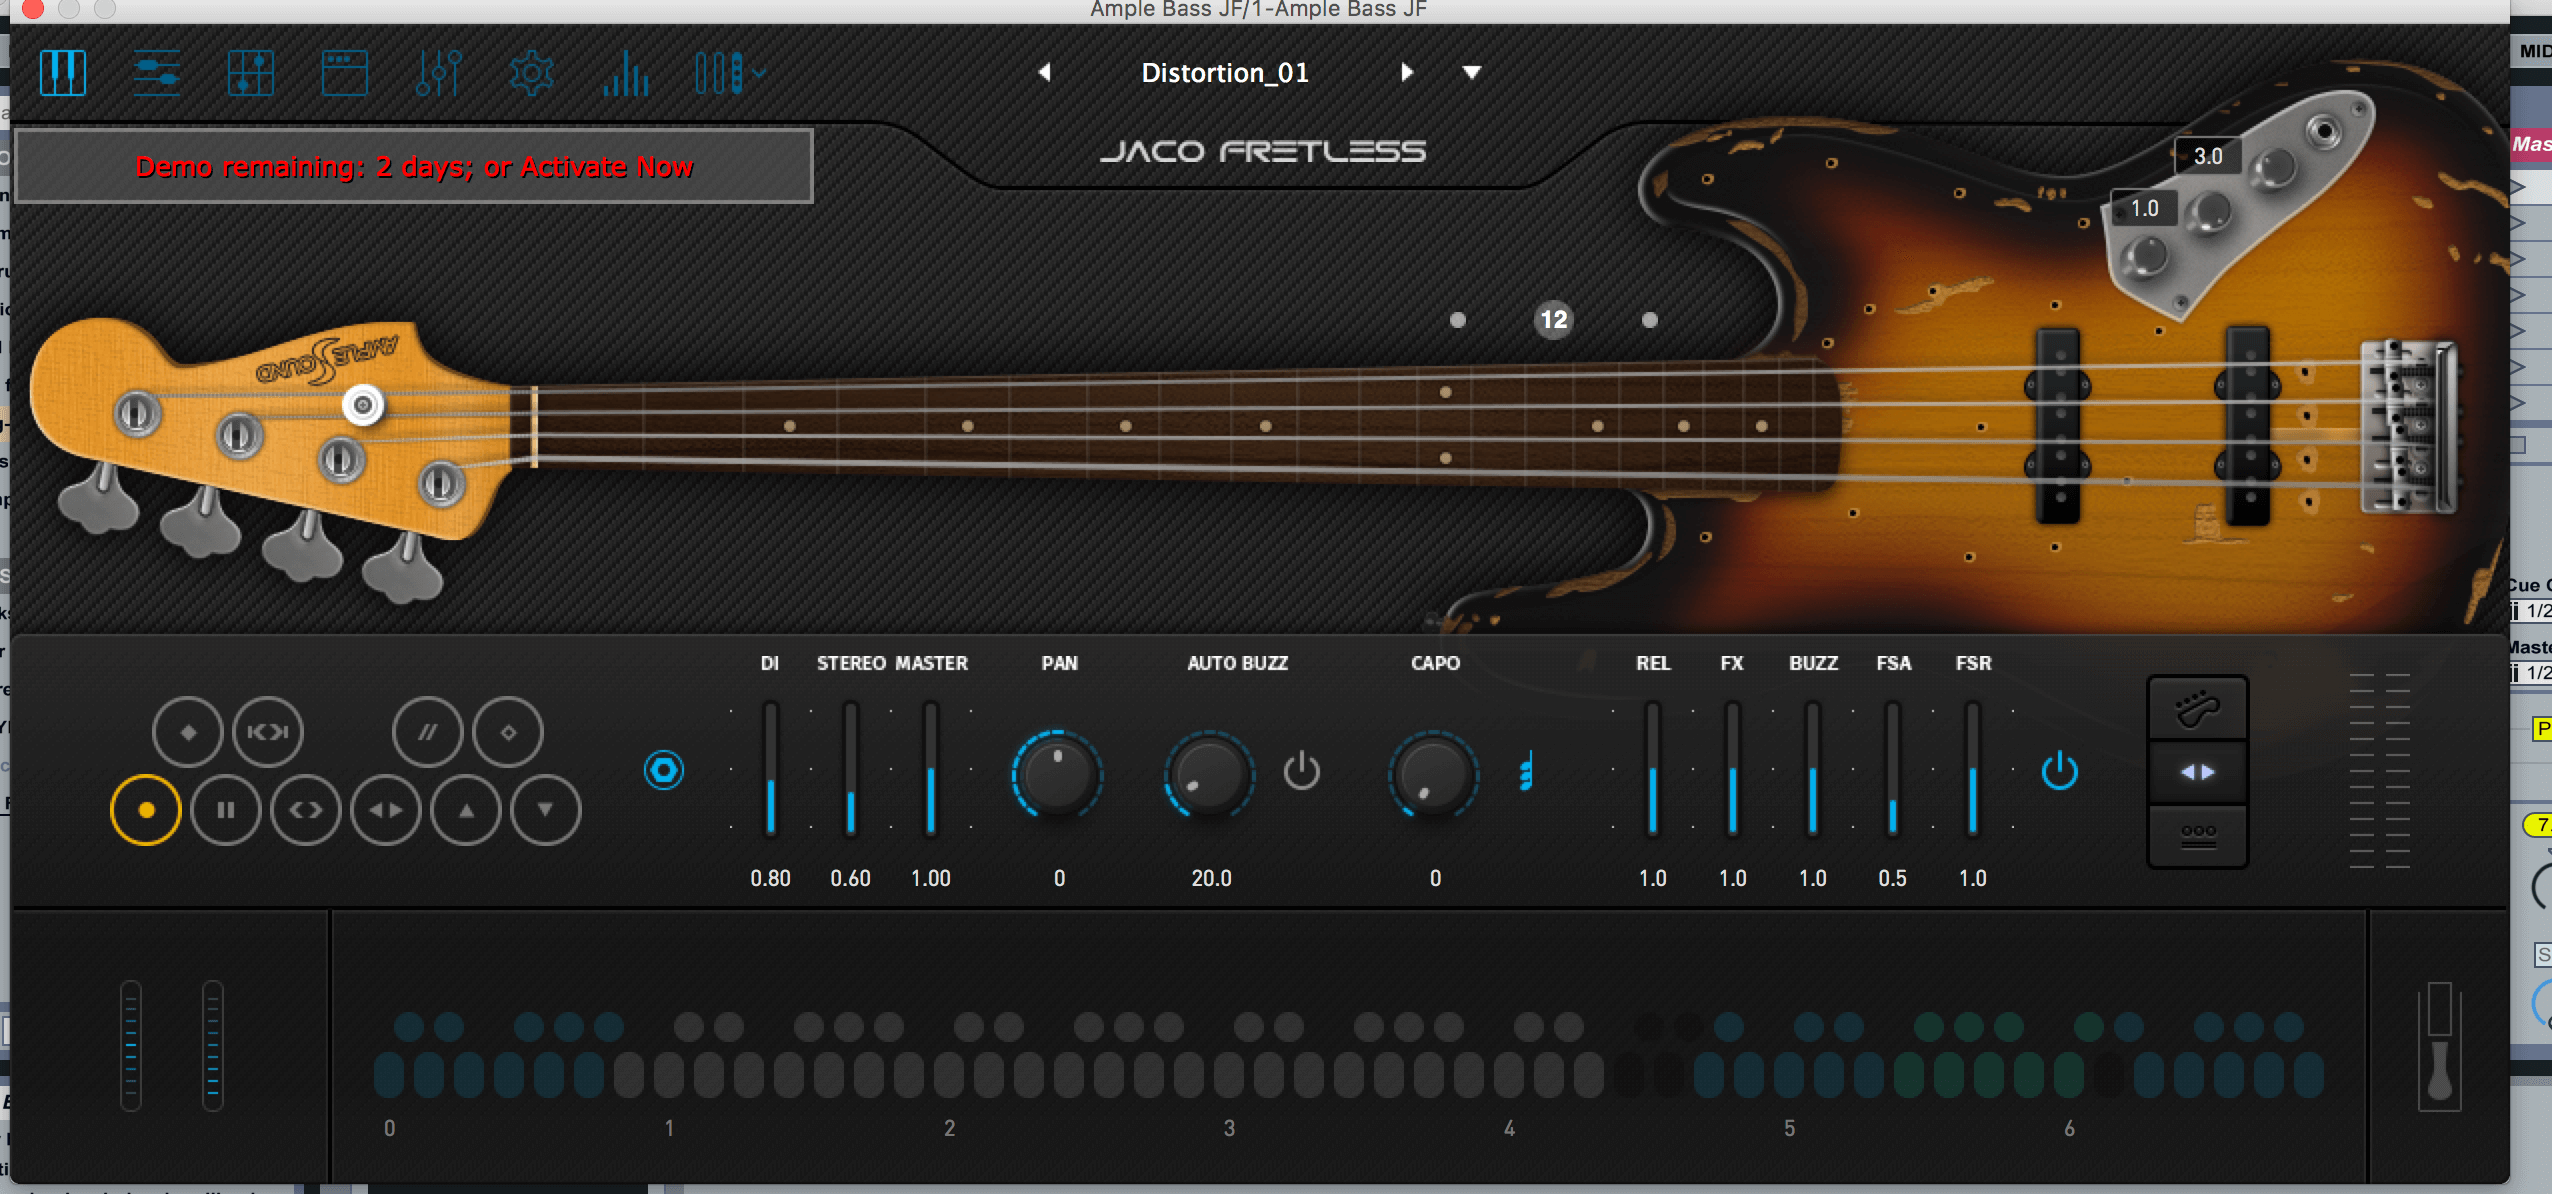 Interface of Ample Bass Guitar VST